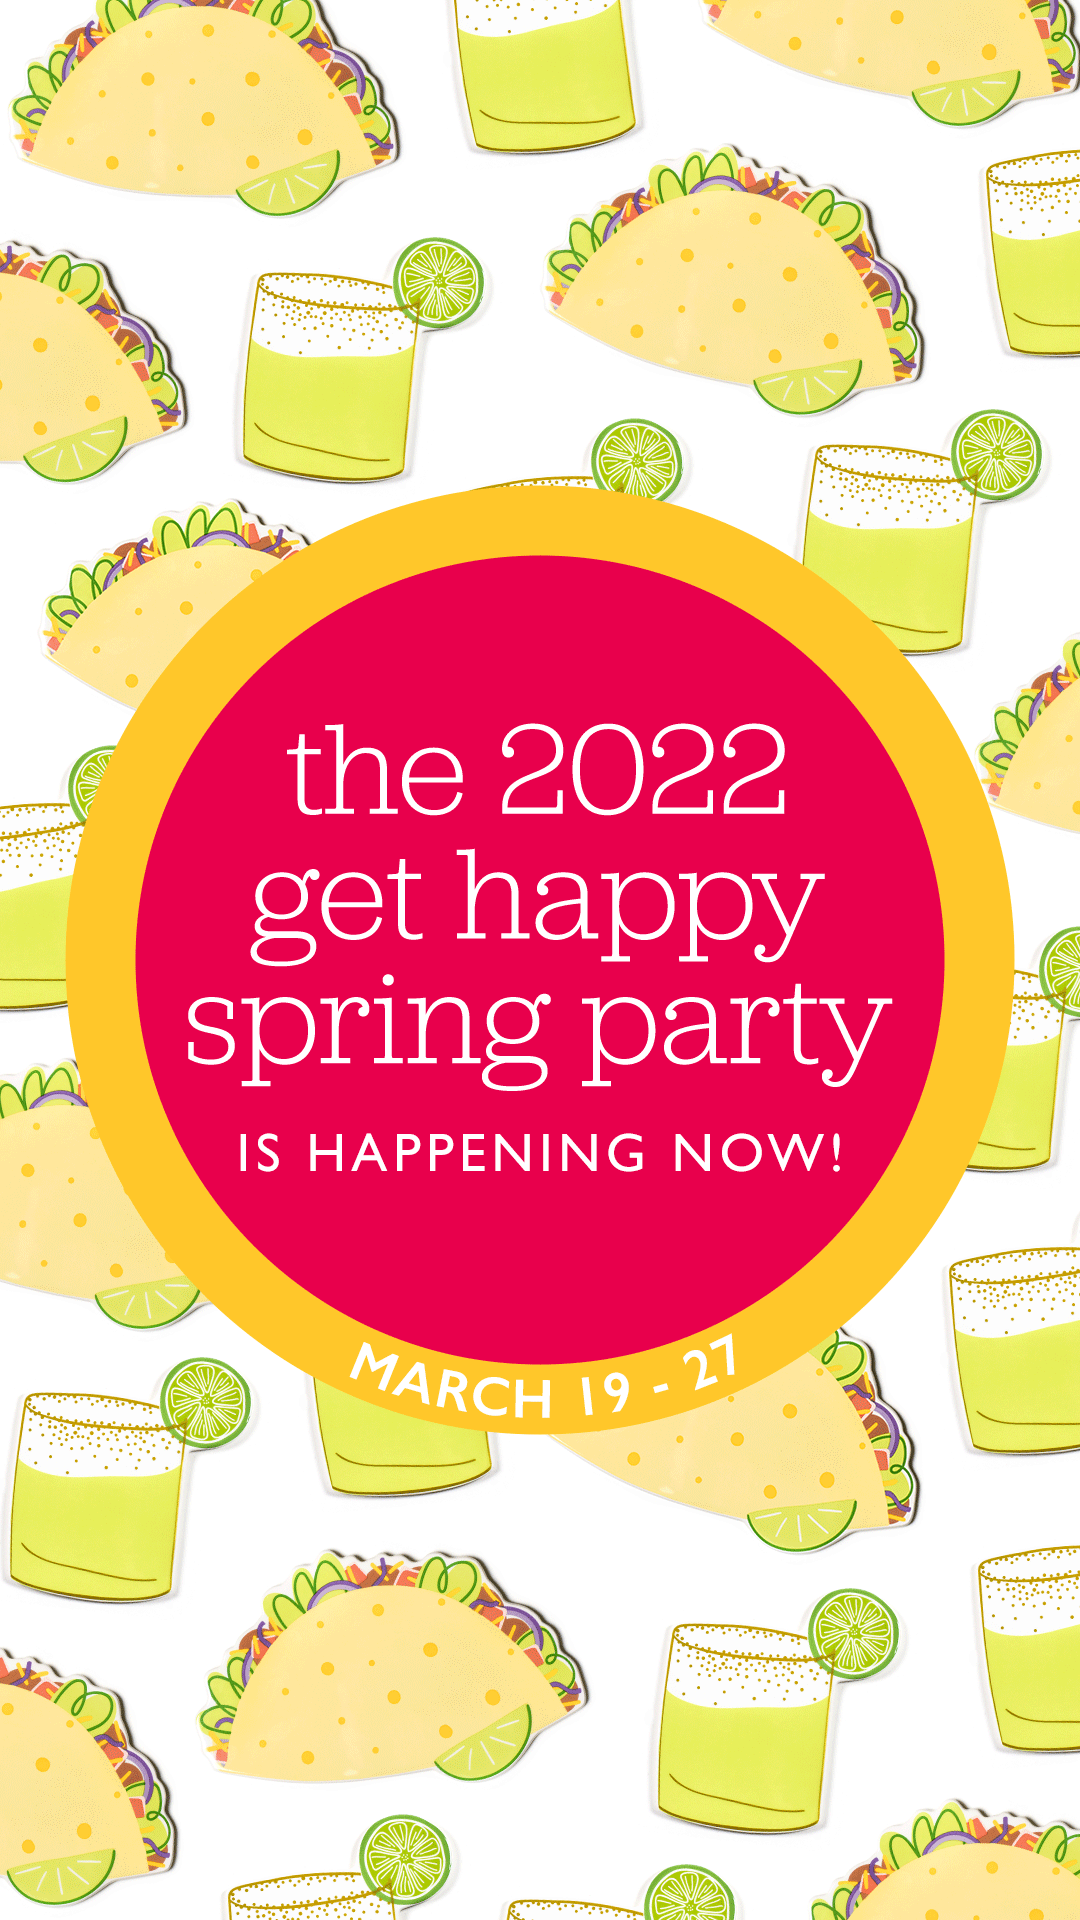 2022---CAM---HEV_Organic-Social_Story_Get-Happy-Spring-Party-Campaign_Promotion-Details-&-Party-Dates_Animated-1.gif